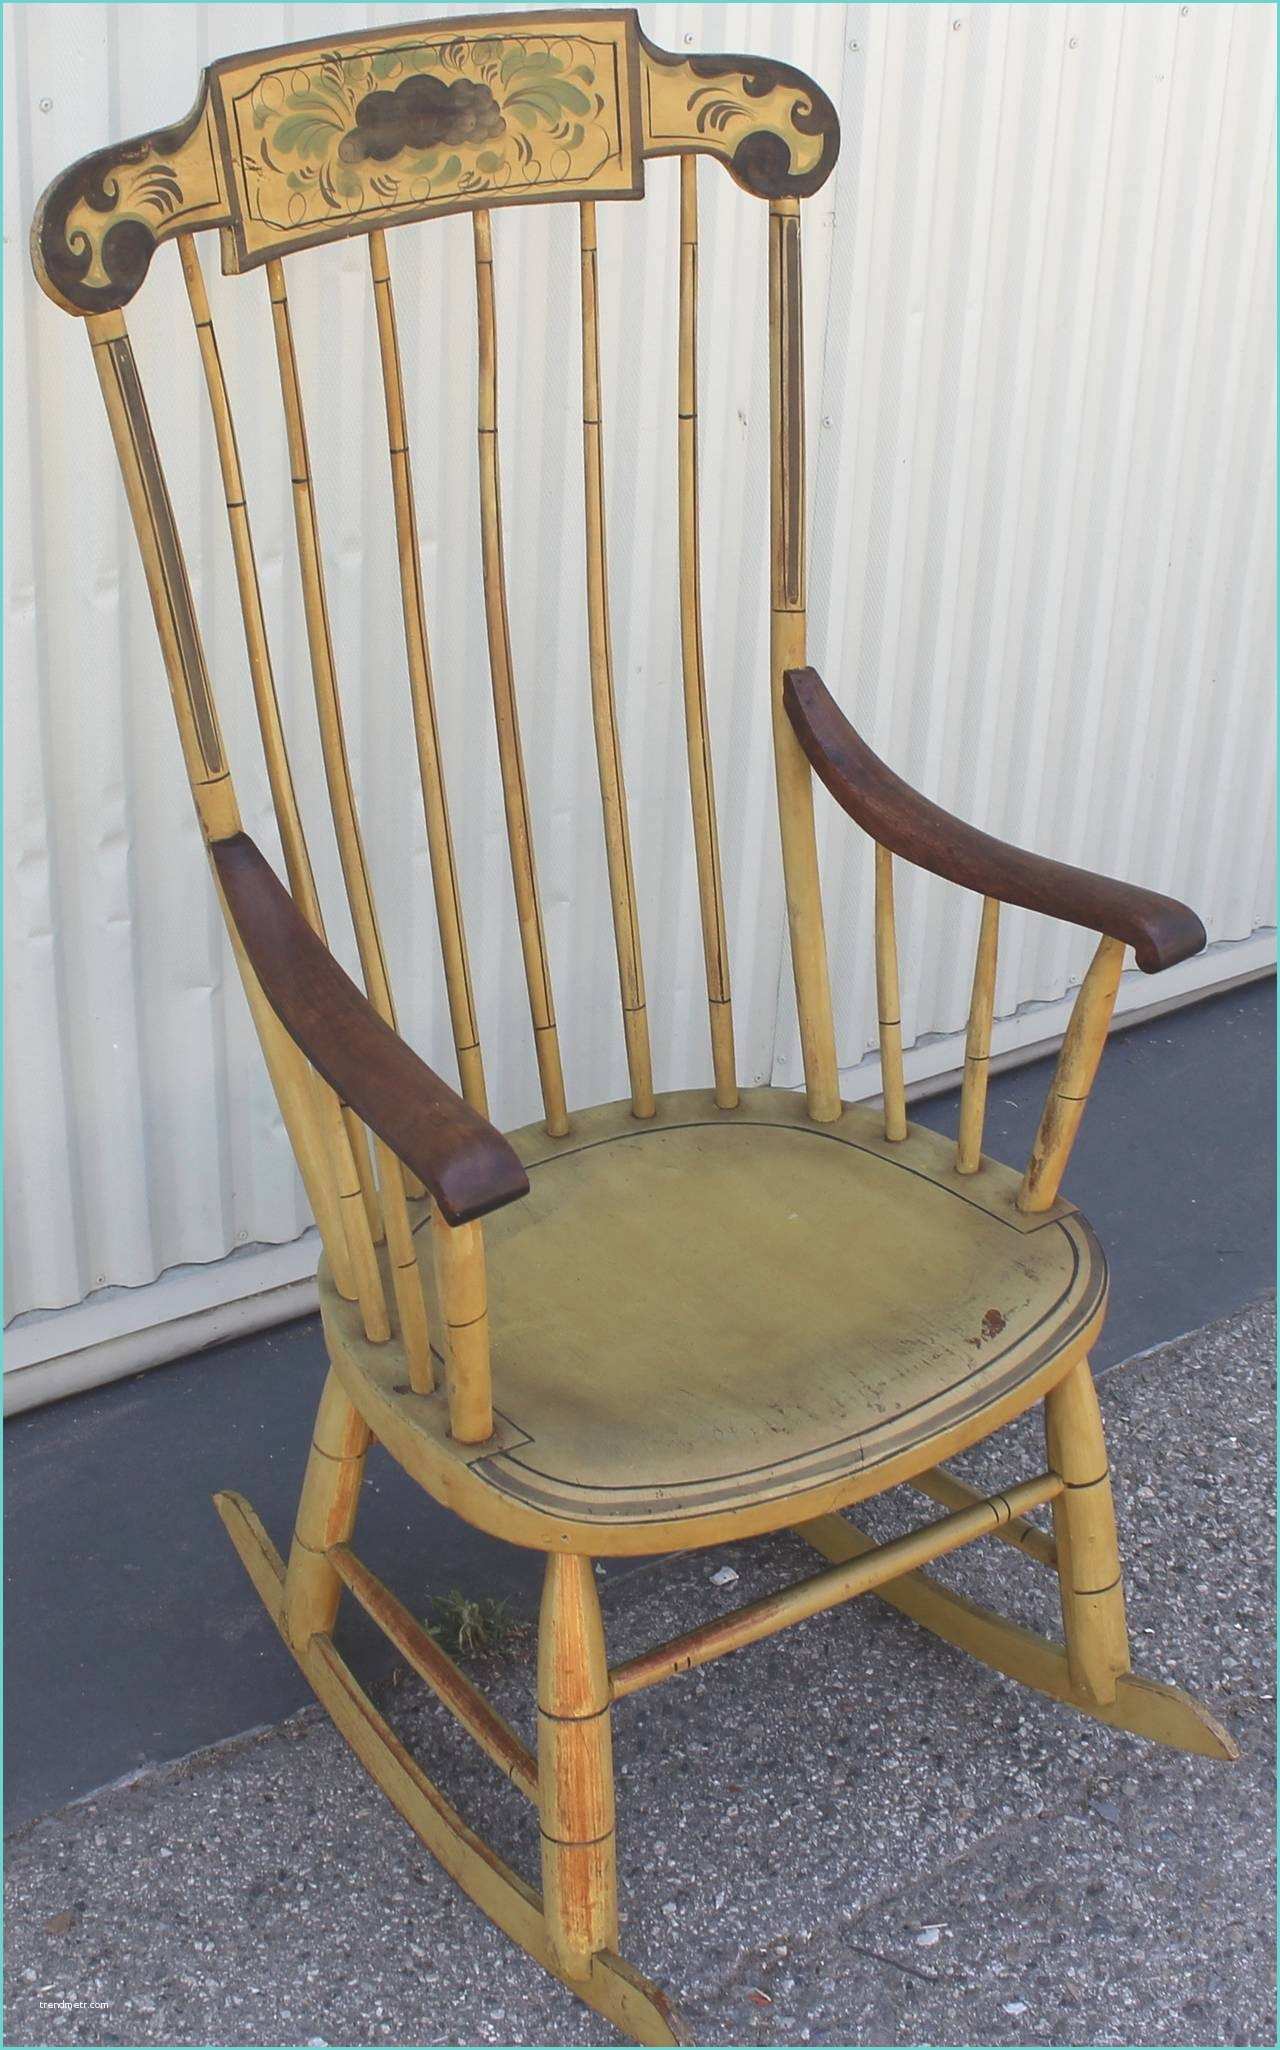 Originals Chairmakers Rocking Chair 19th Century Fancy original Painted Rocking Chair From New